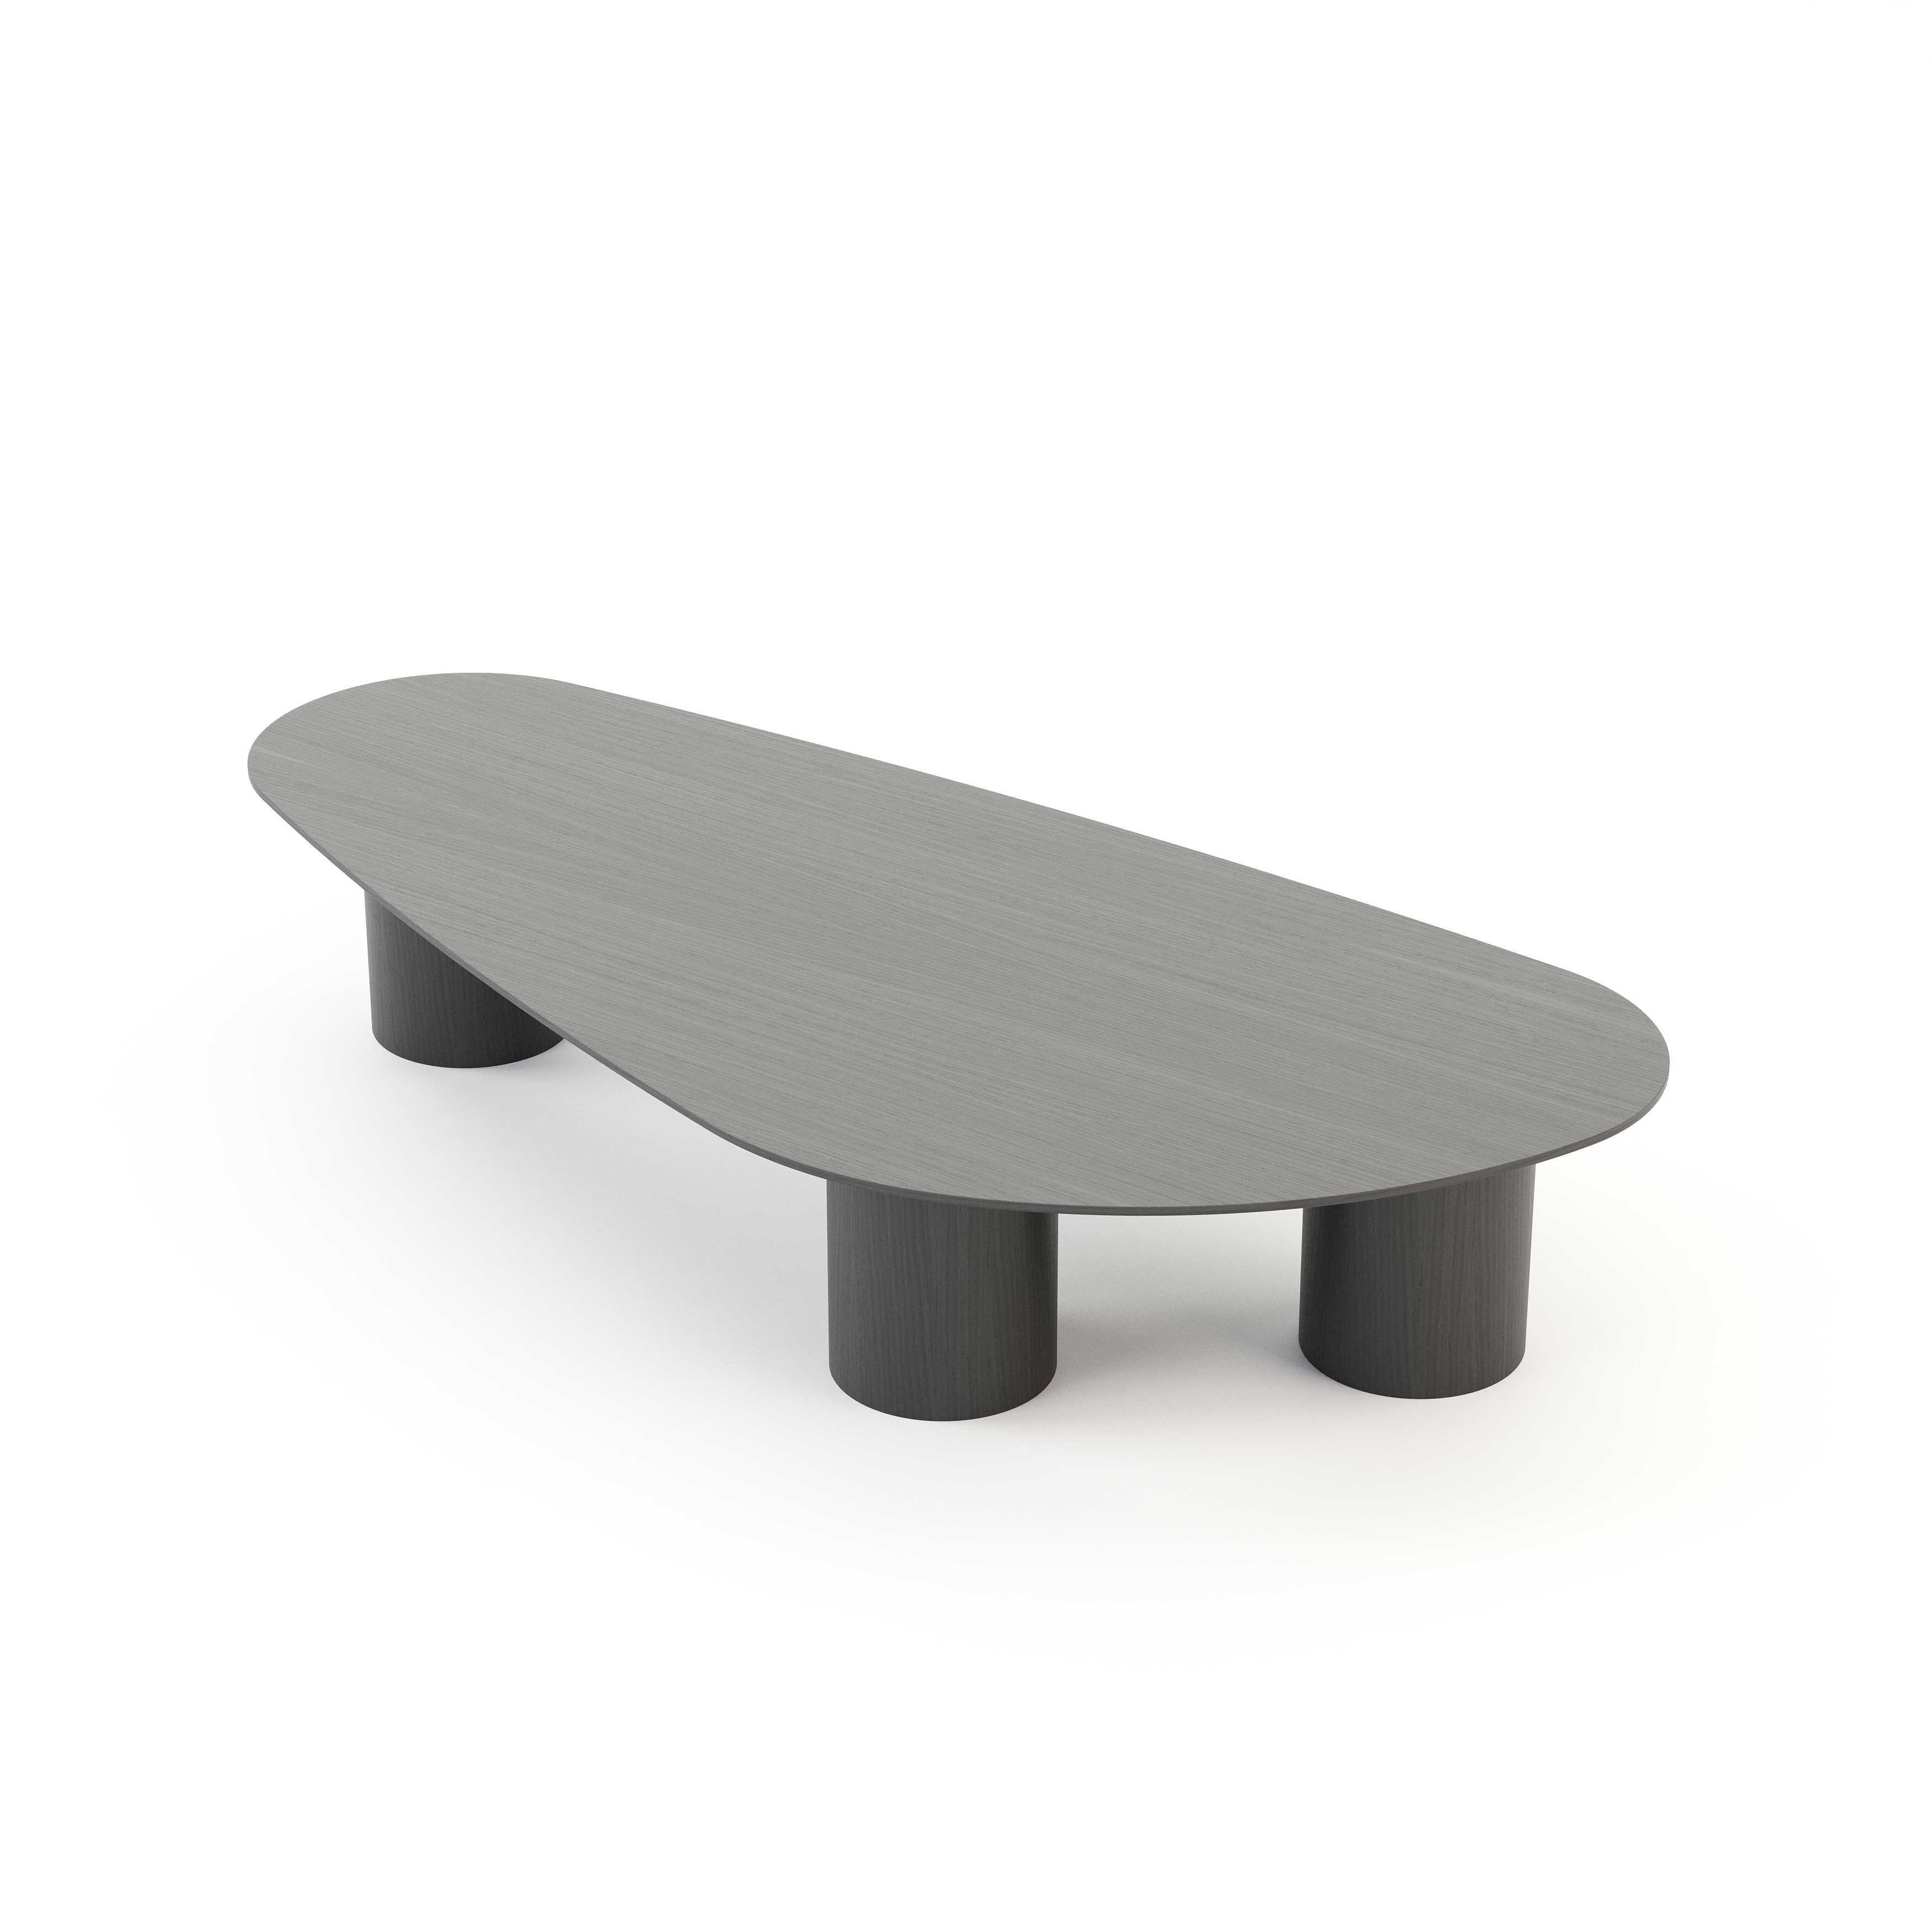 Portuguese Organic Modern Natur Coffee Table made with Oak, Handmade by Stylish Club For Sale